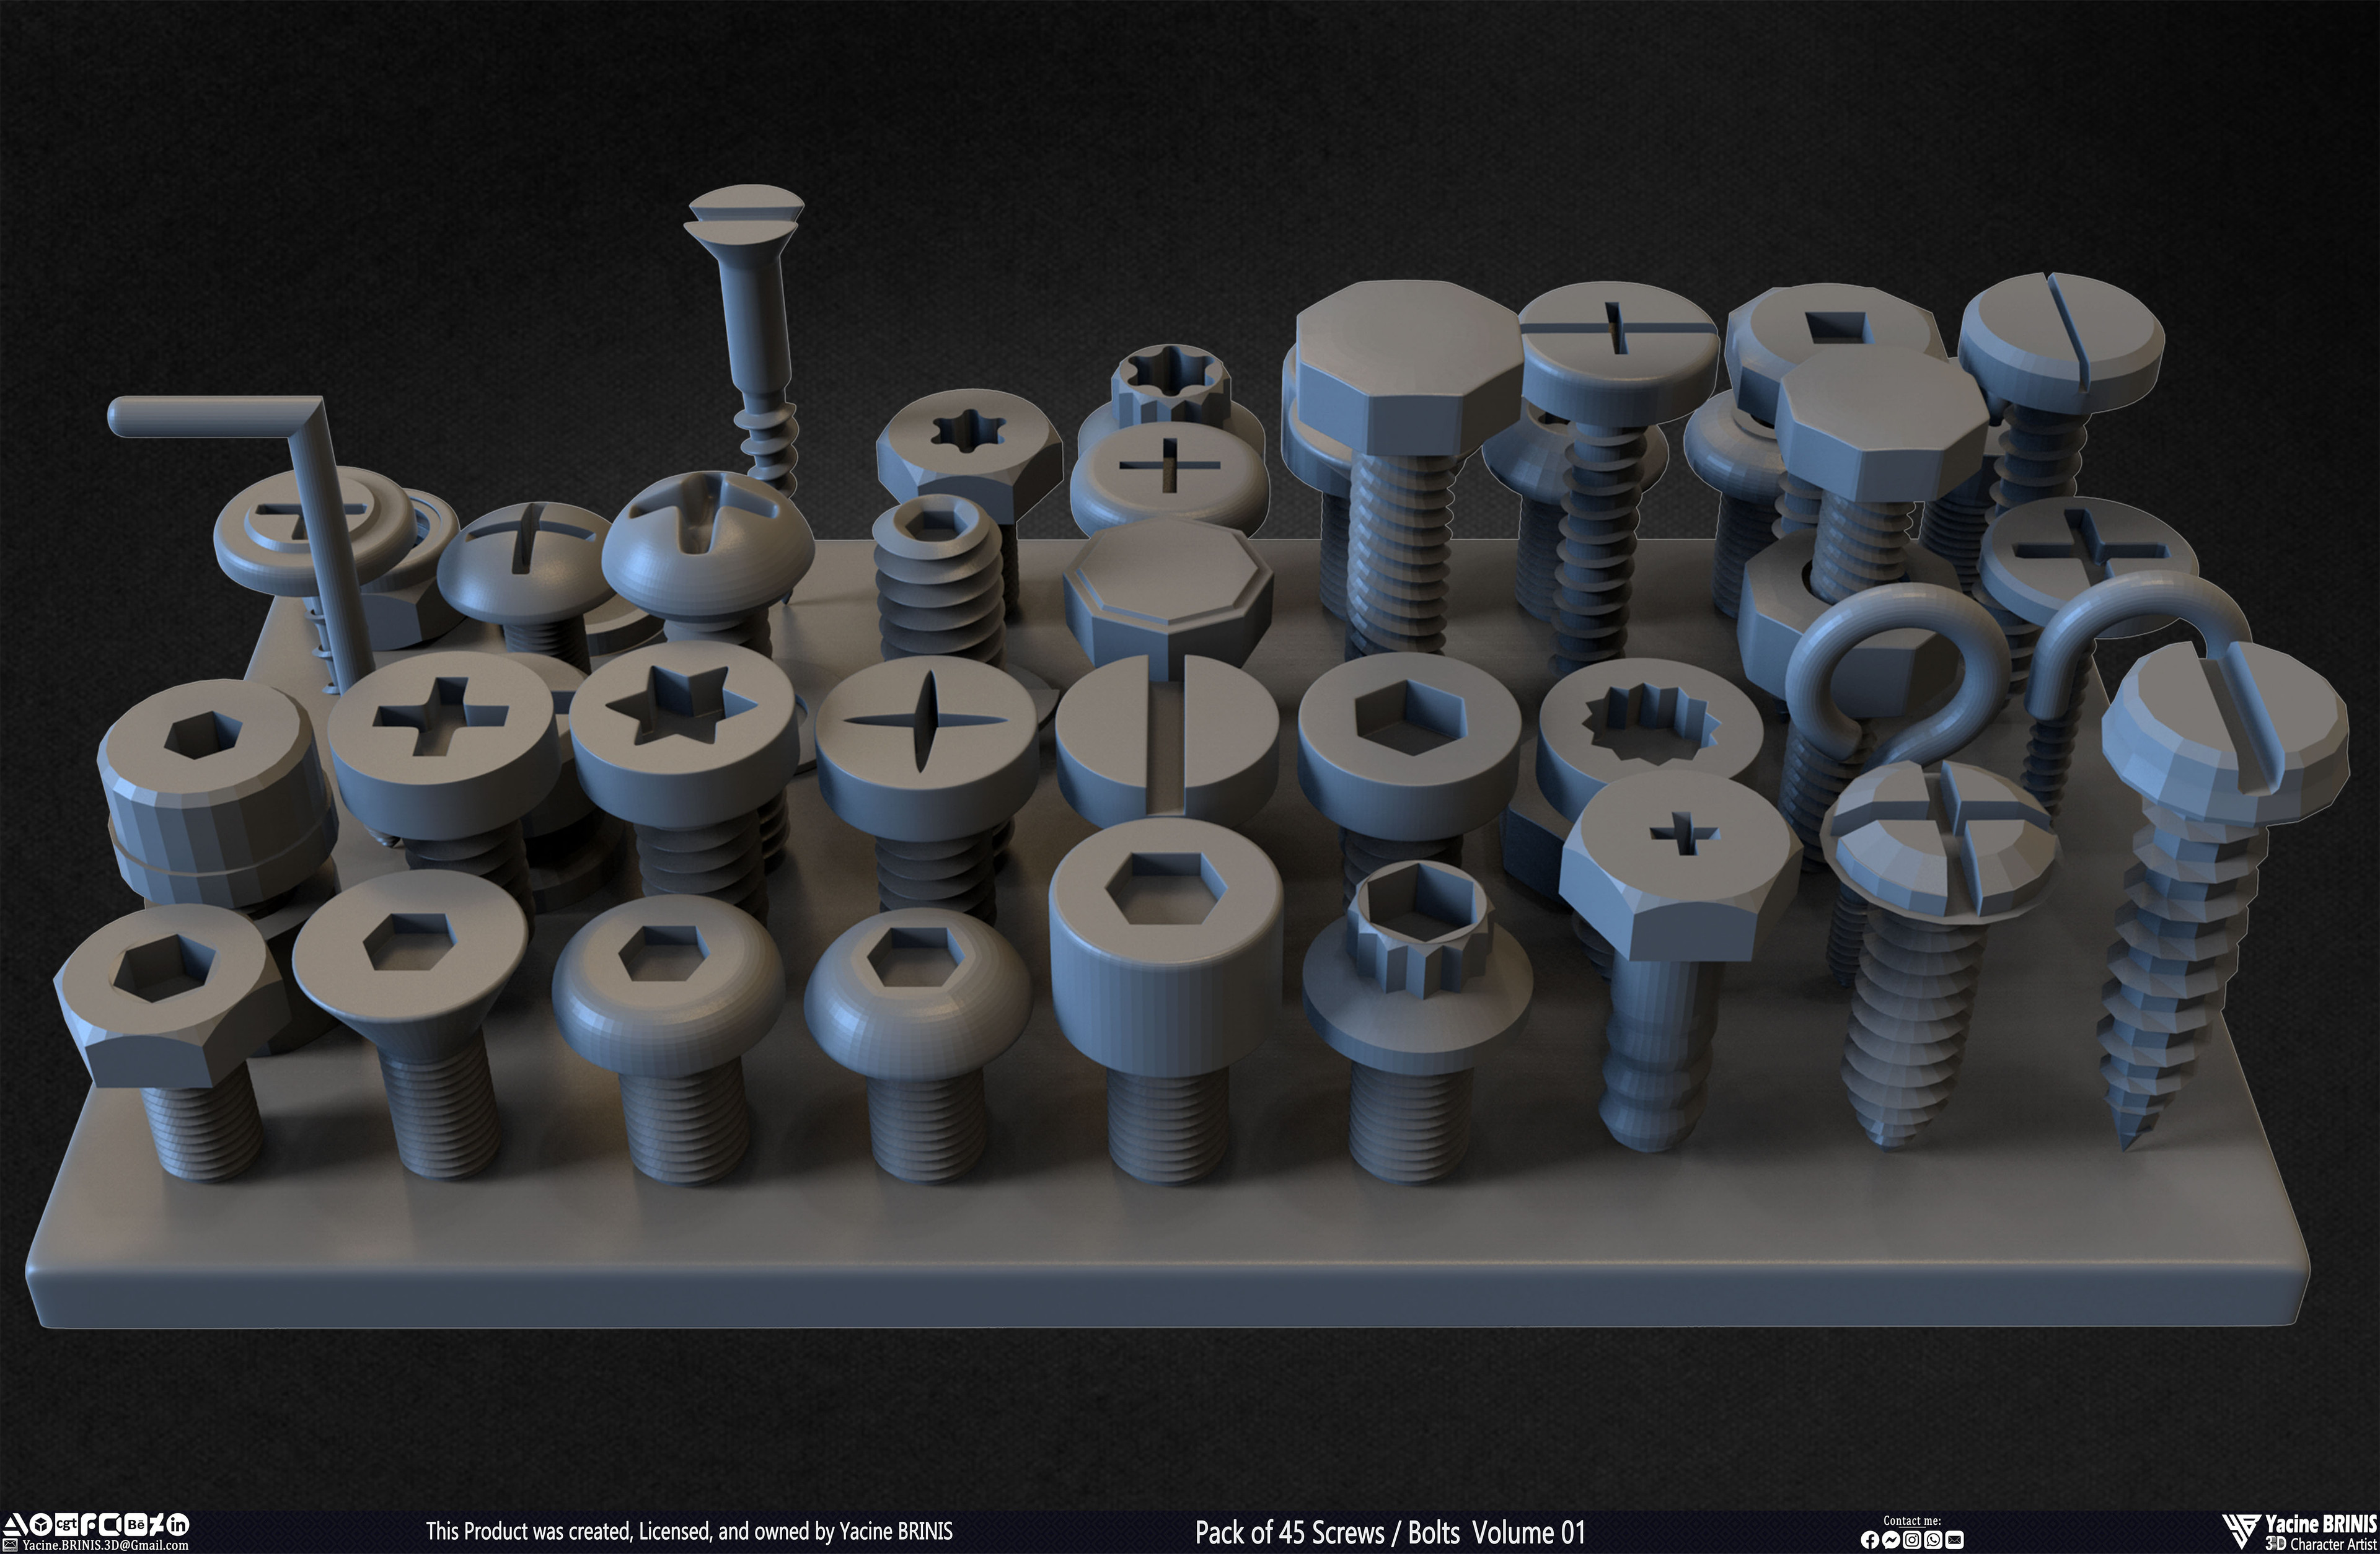 Pack of 45 Screws-Bolts Volume 01 Sculpted By Yacine BRINIS Set 018